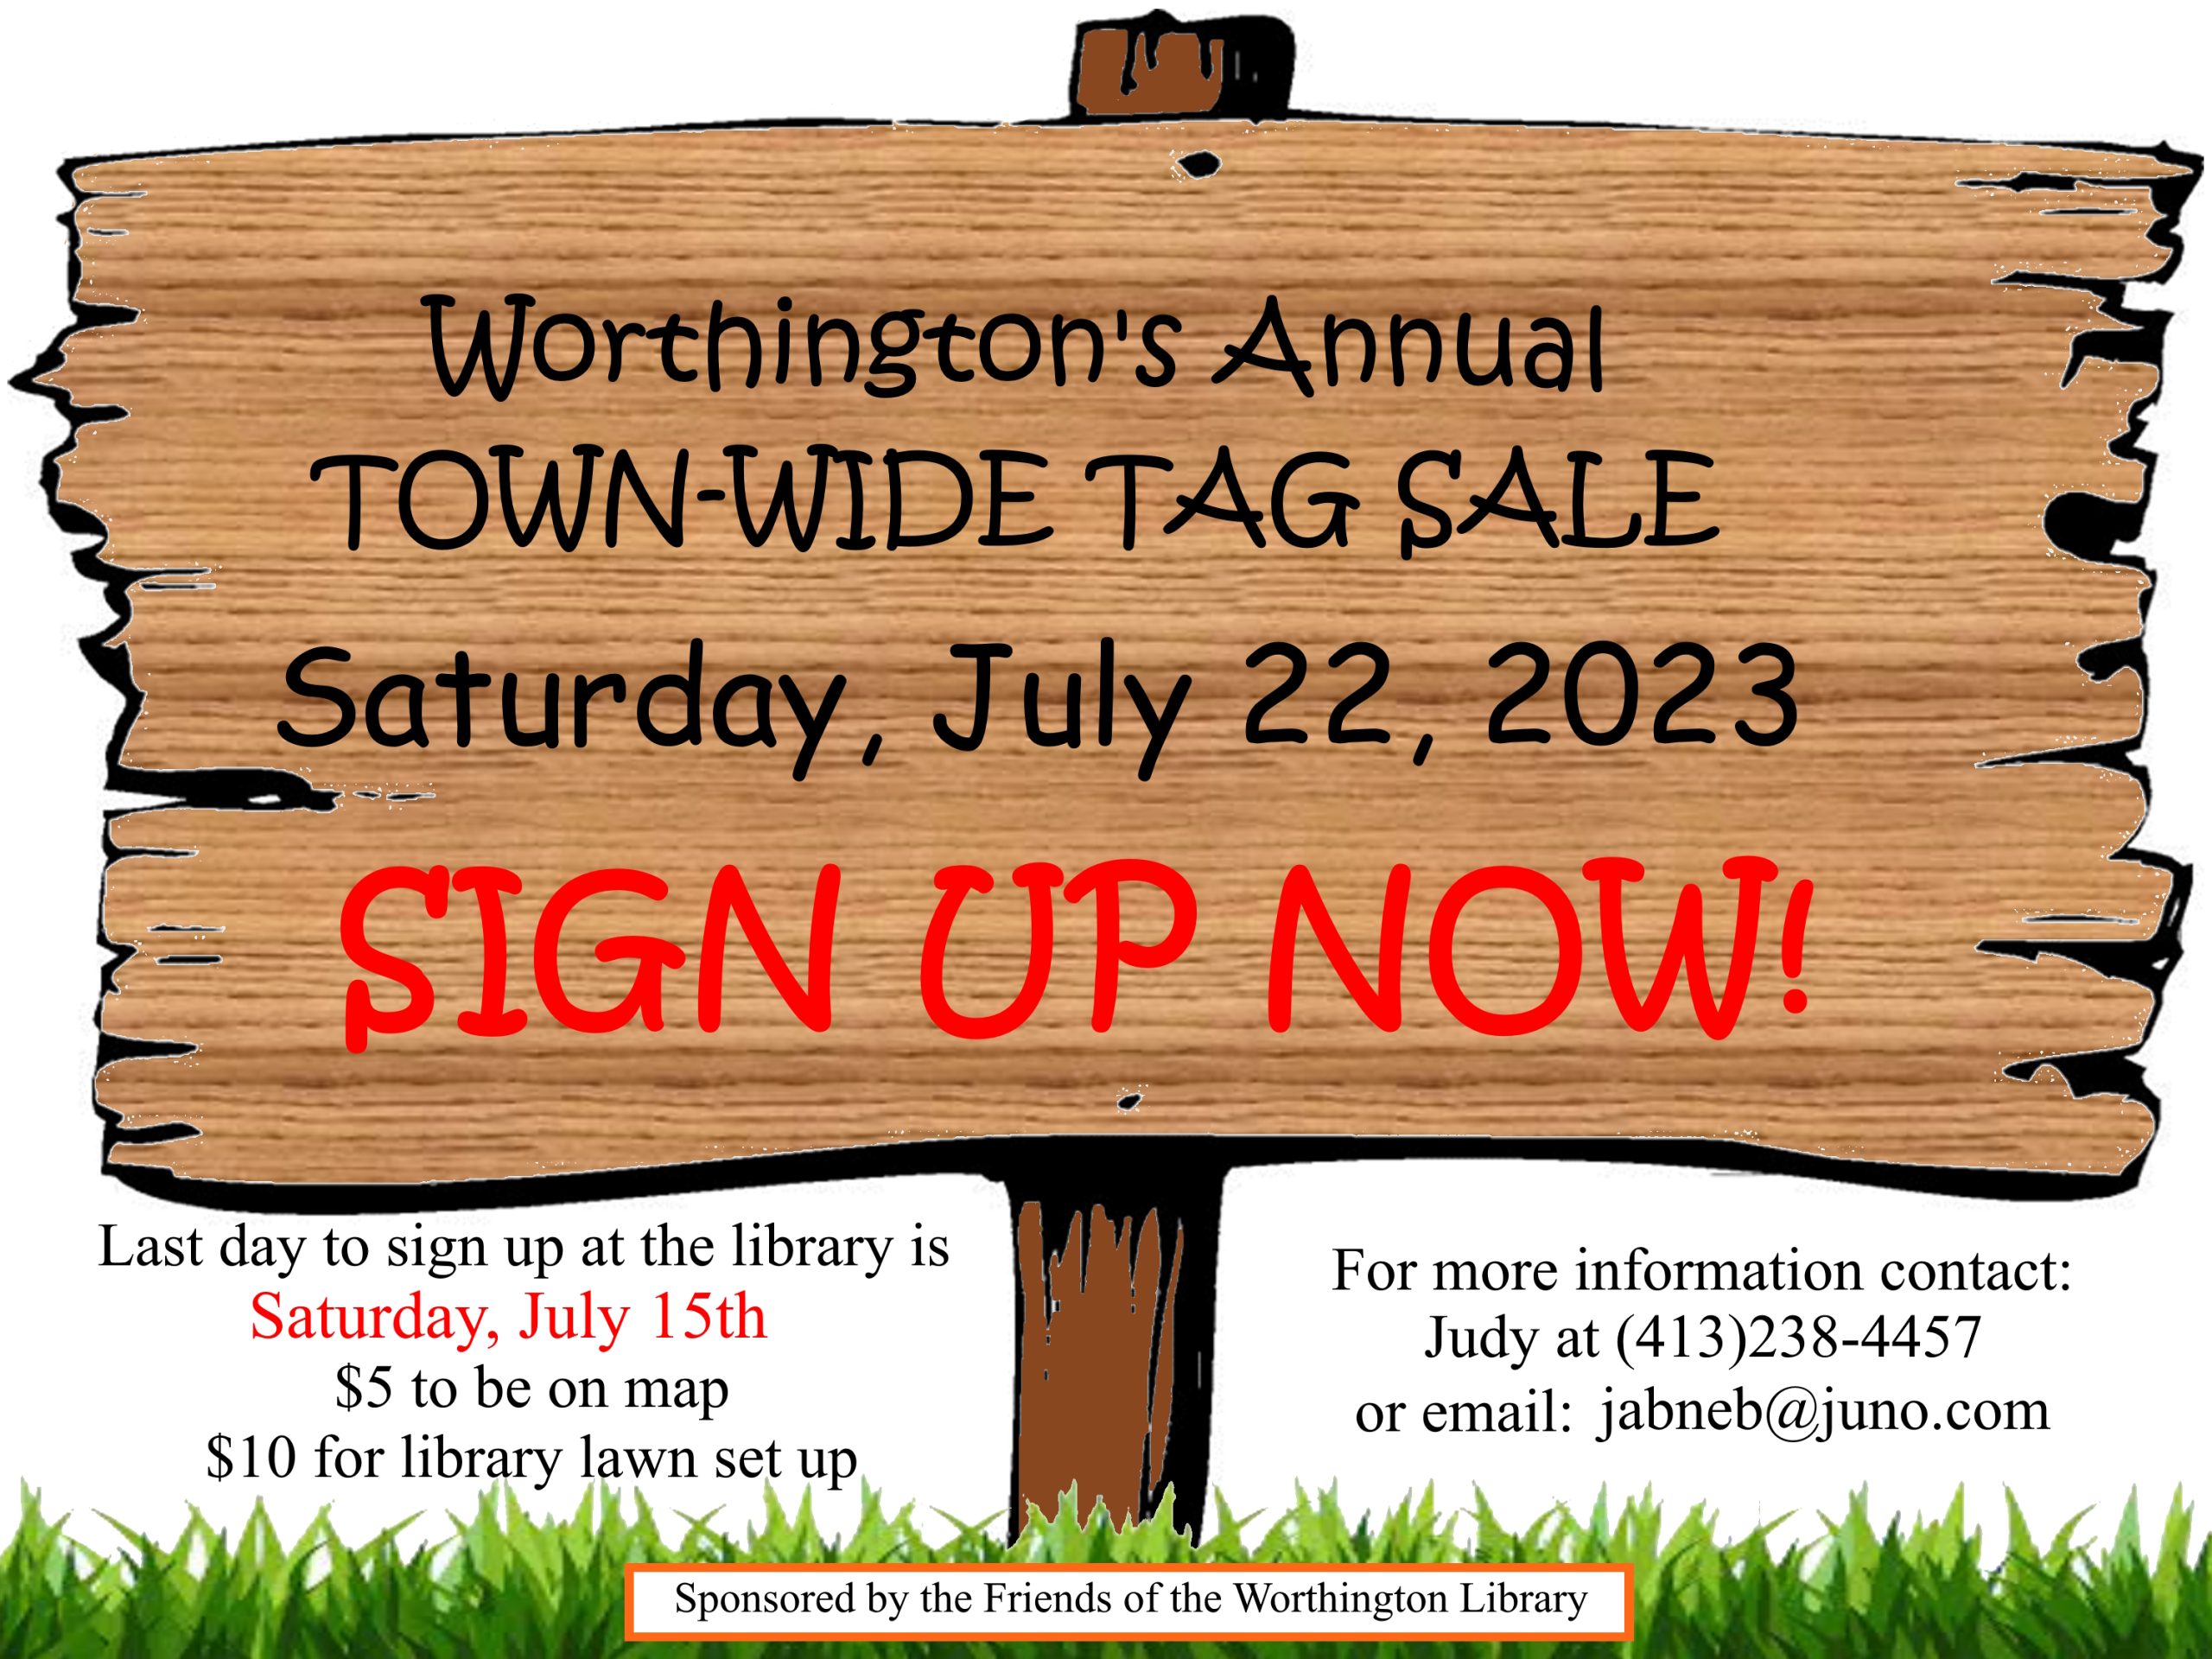 TownWide Tag Sale